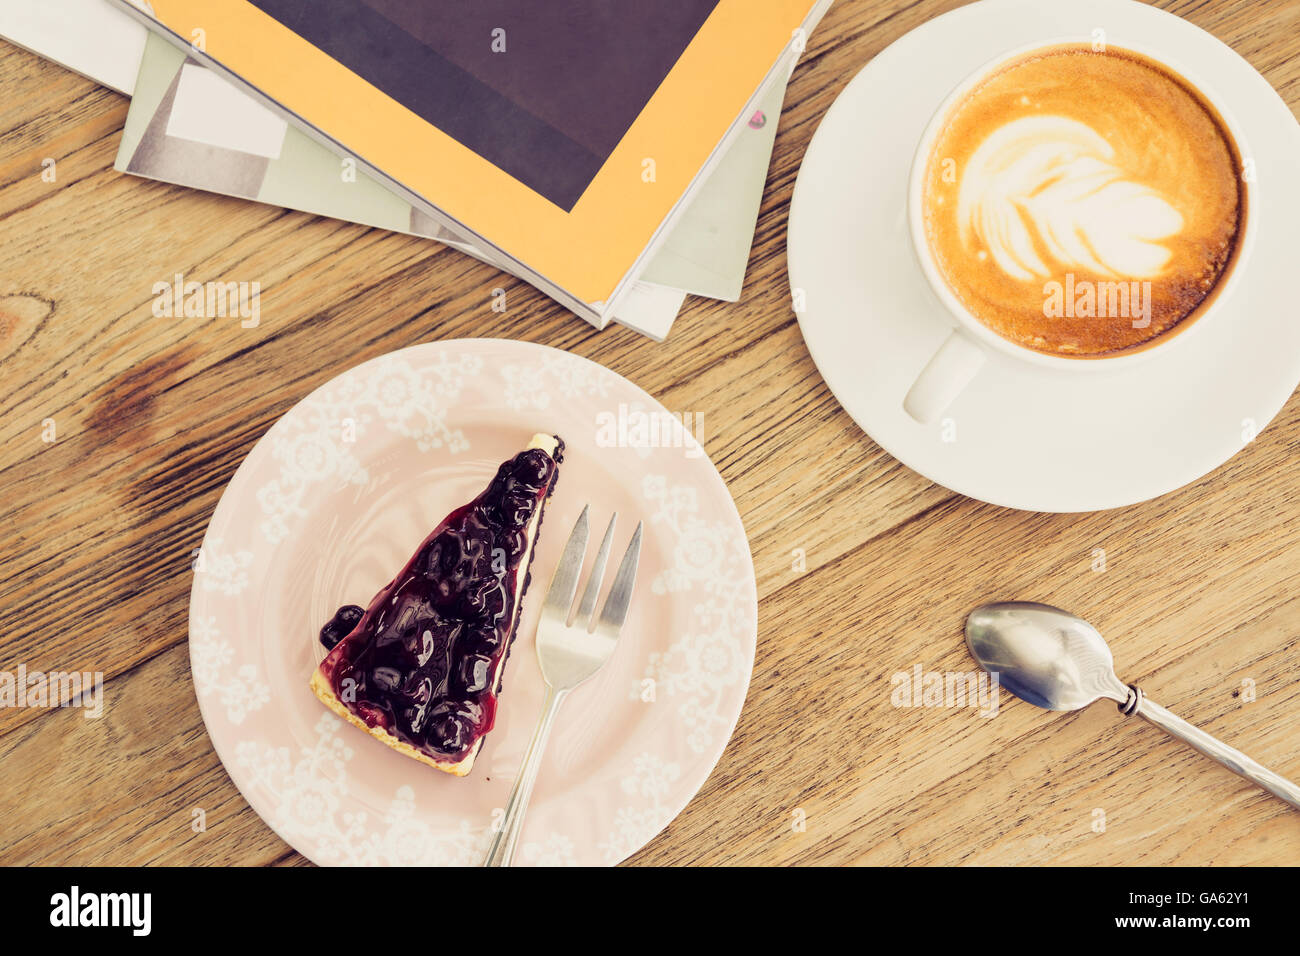 Hot coffee latte with blue berry cheese cake leisure lifestyle on wooden table Stock Photo